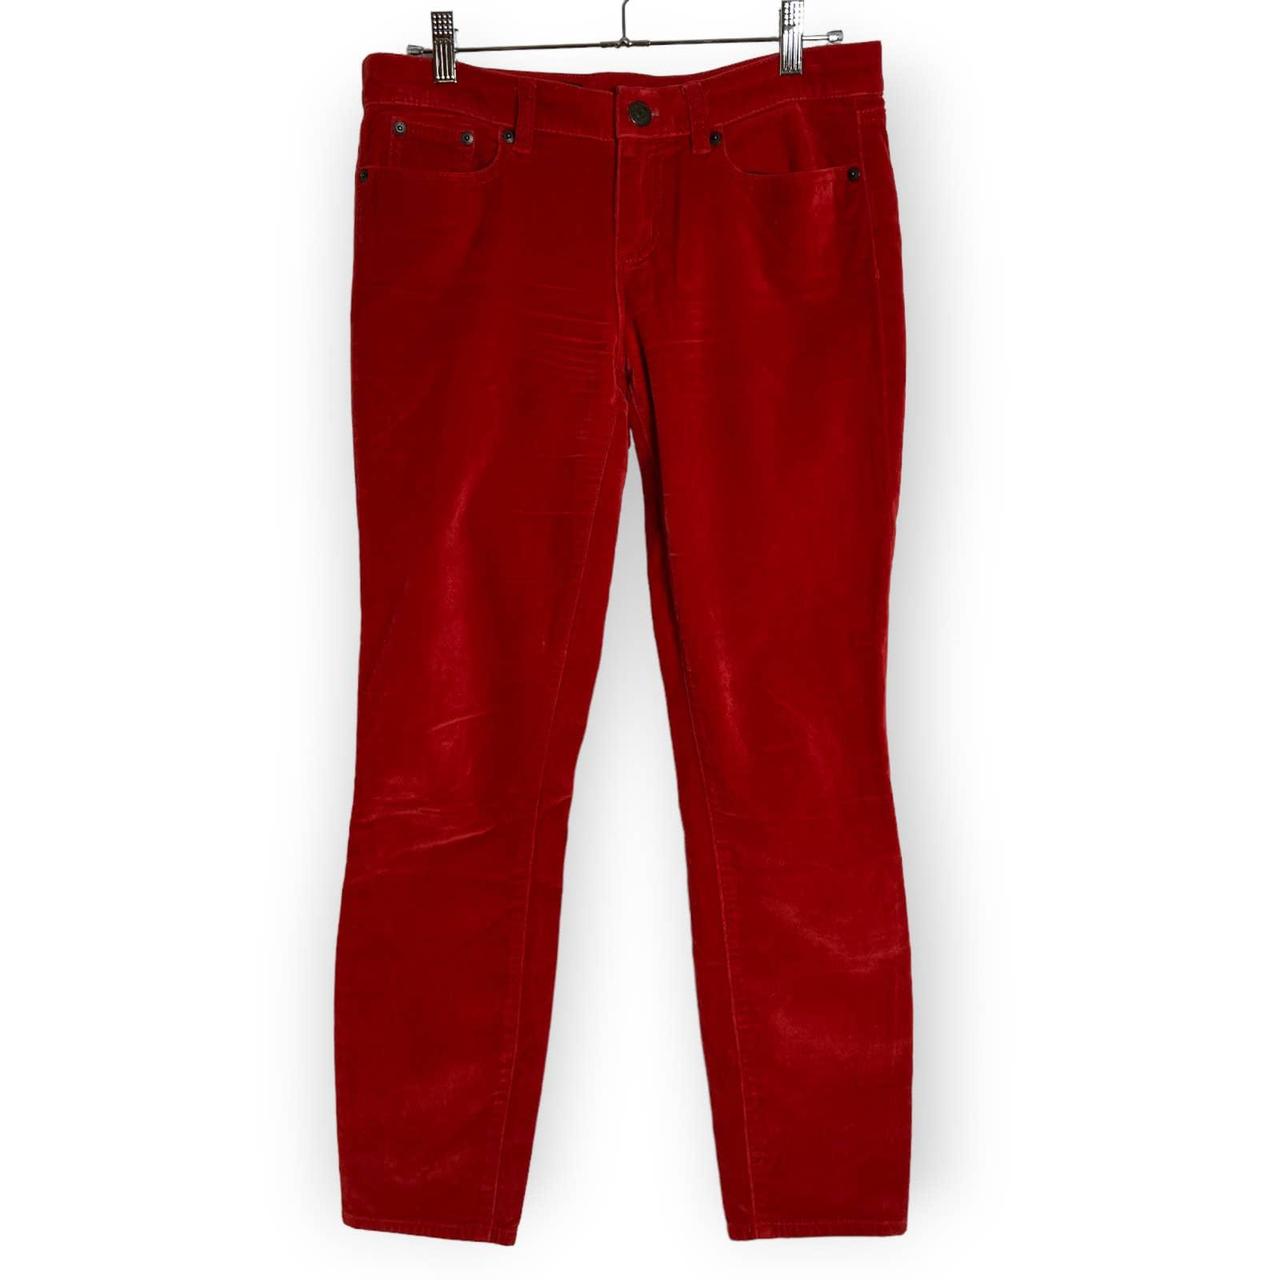 Old Navy Womens Red Flare Pants Size Large - beyond exchange